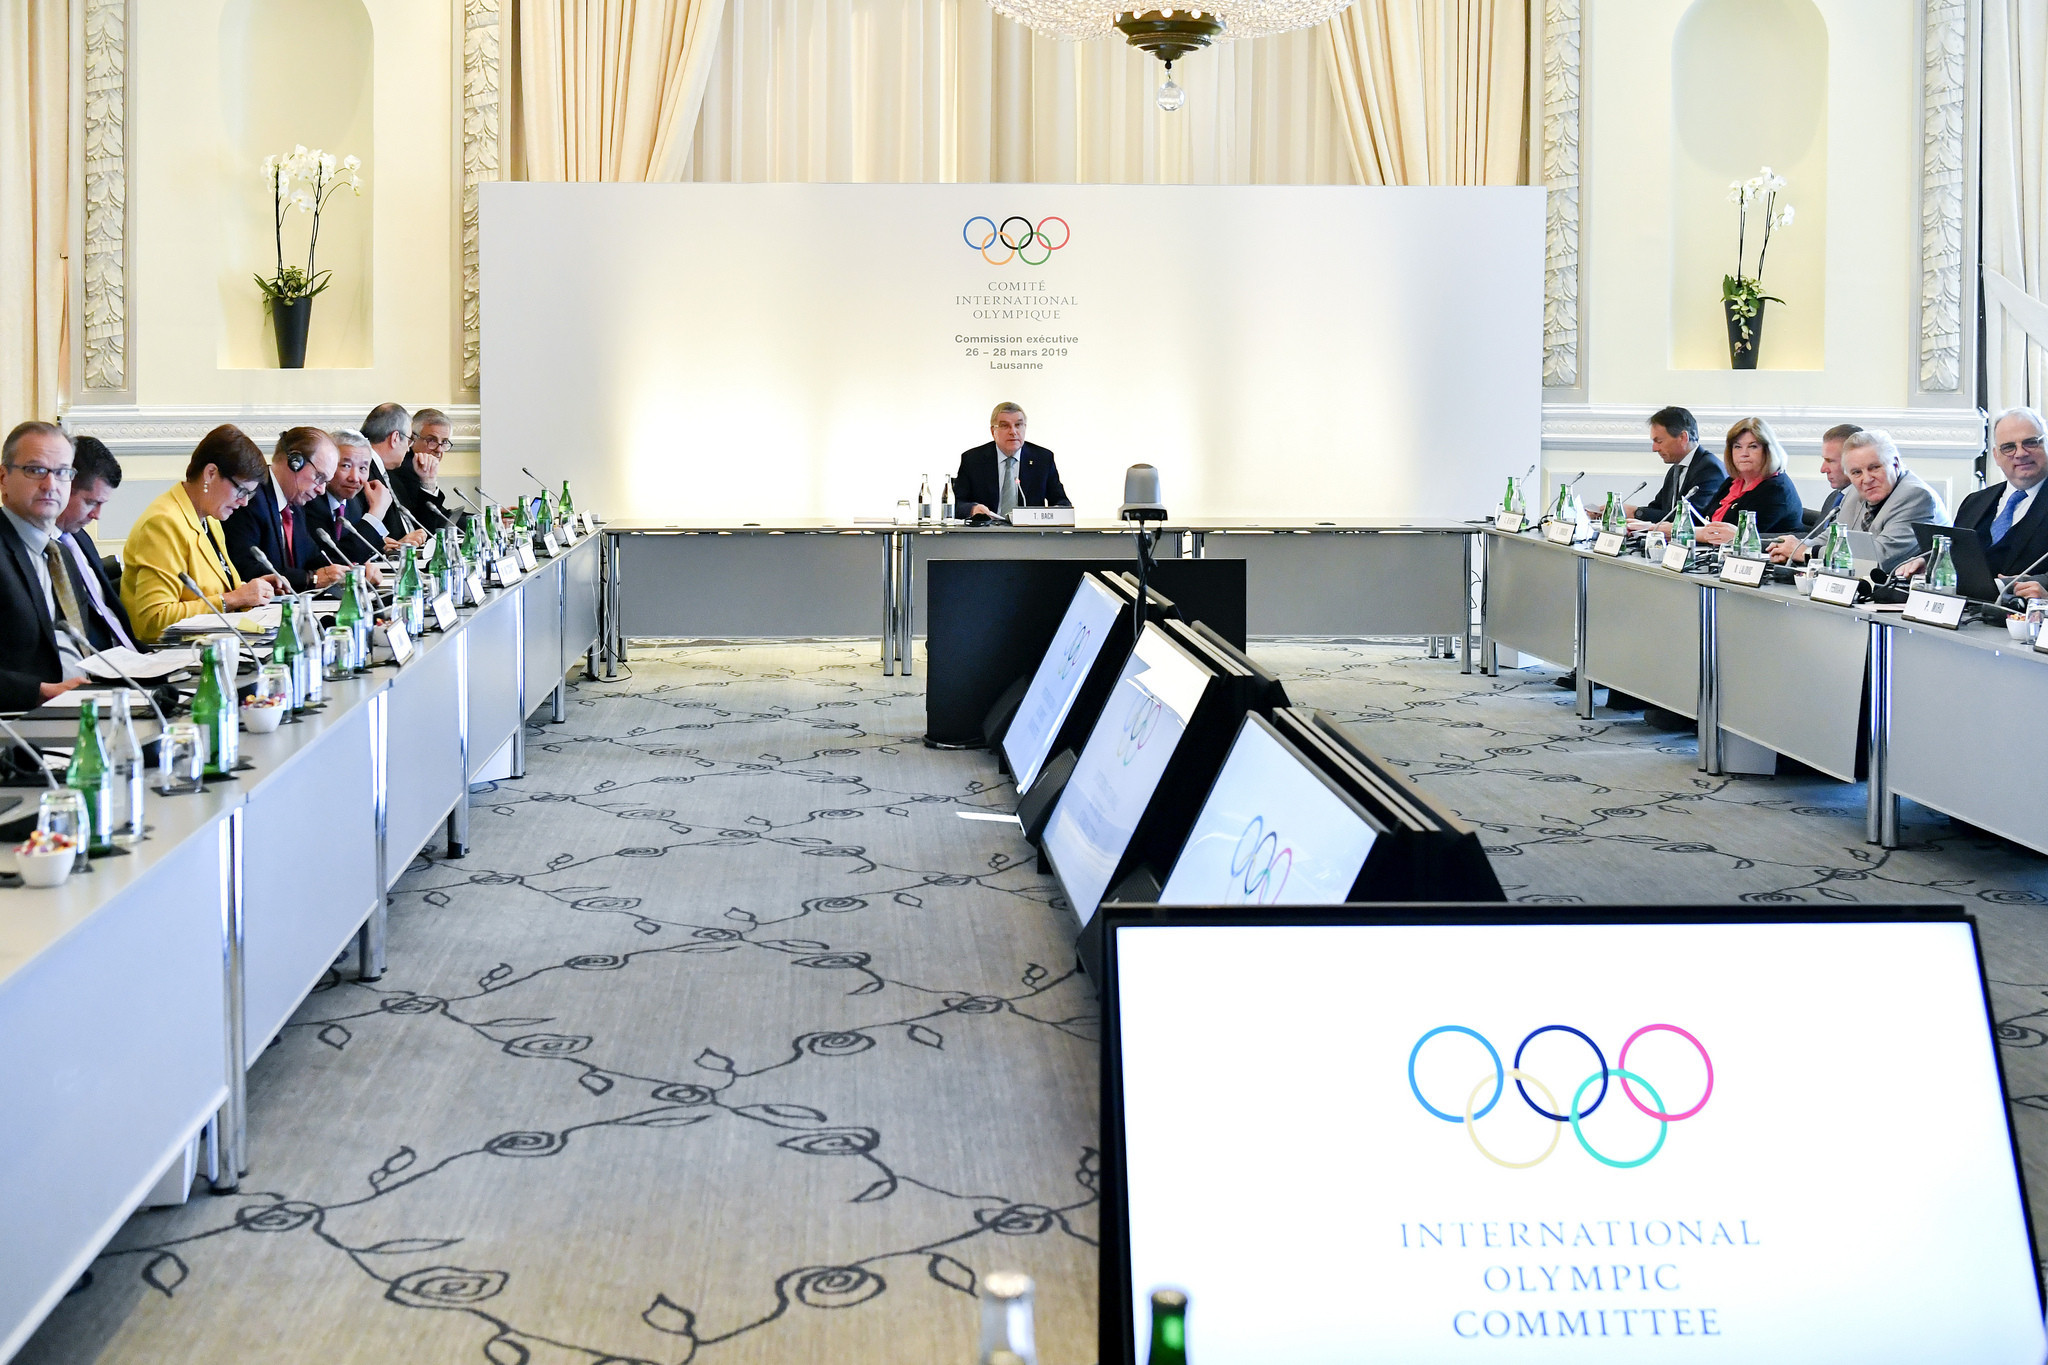 The formation of the working group was approved by the IOC Executive Board in Lausanne last week ©IOC